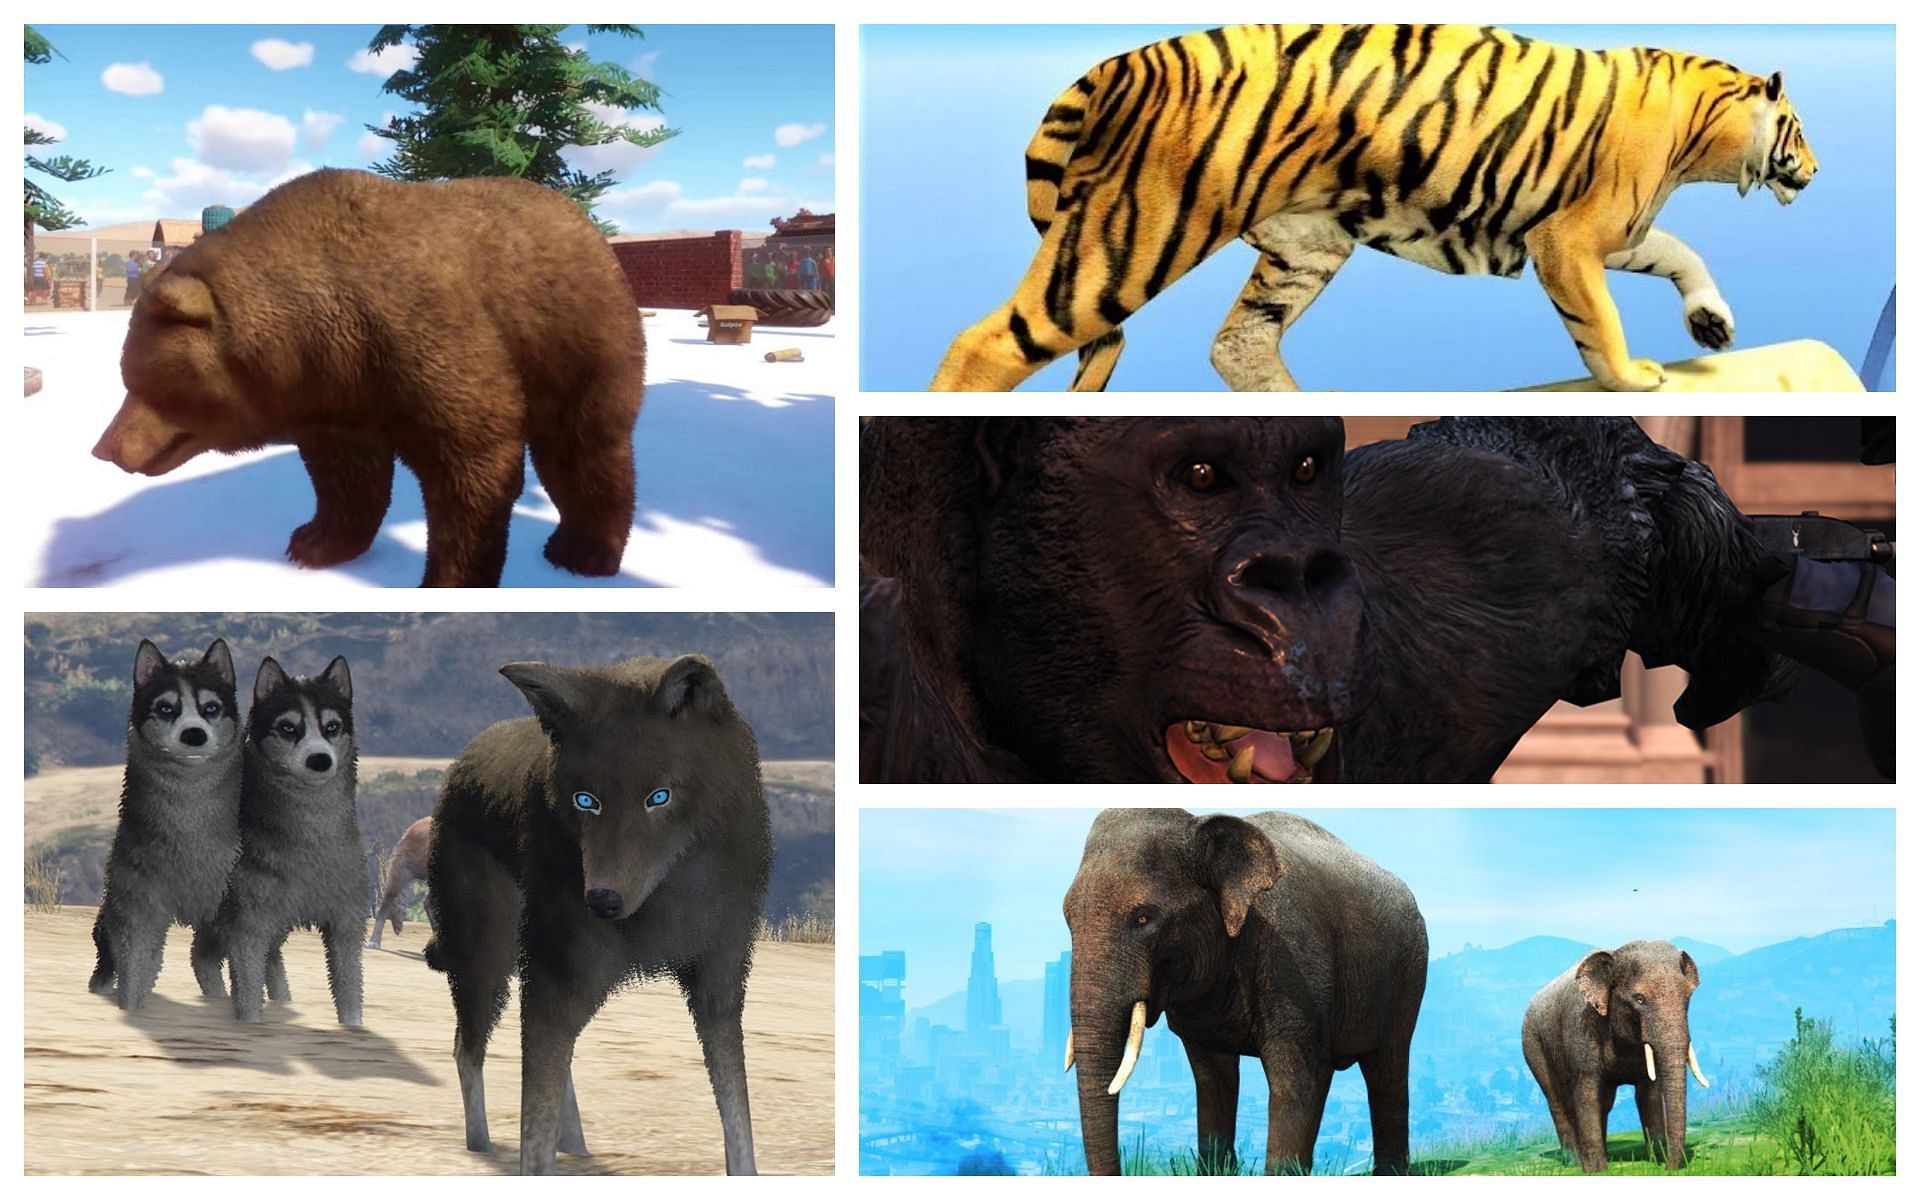 Why GTA 6 should introduce more animals to the game